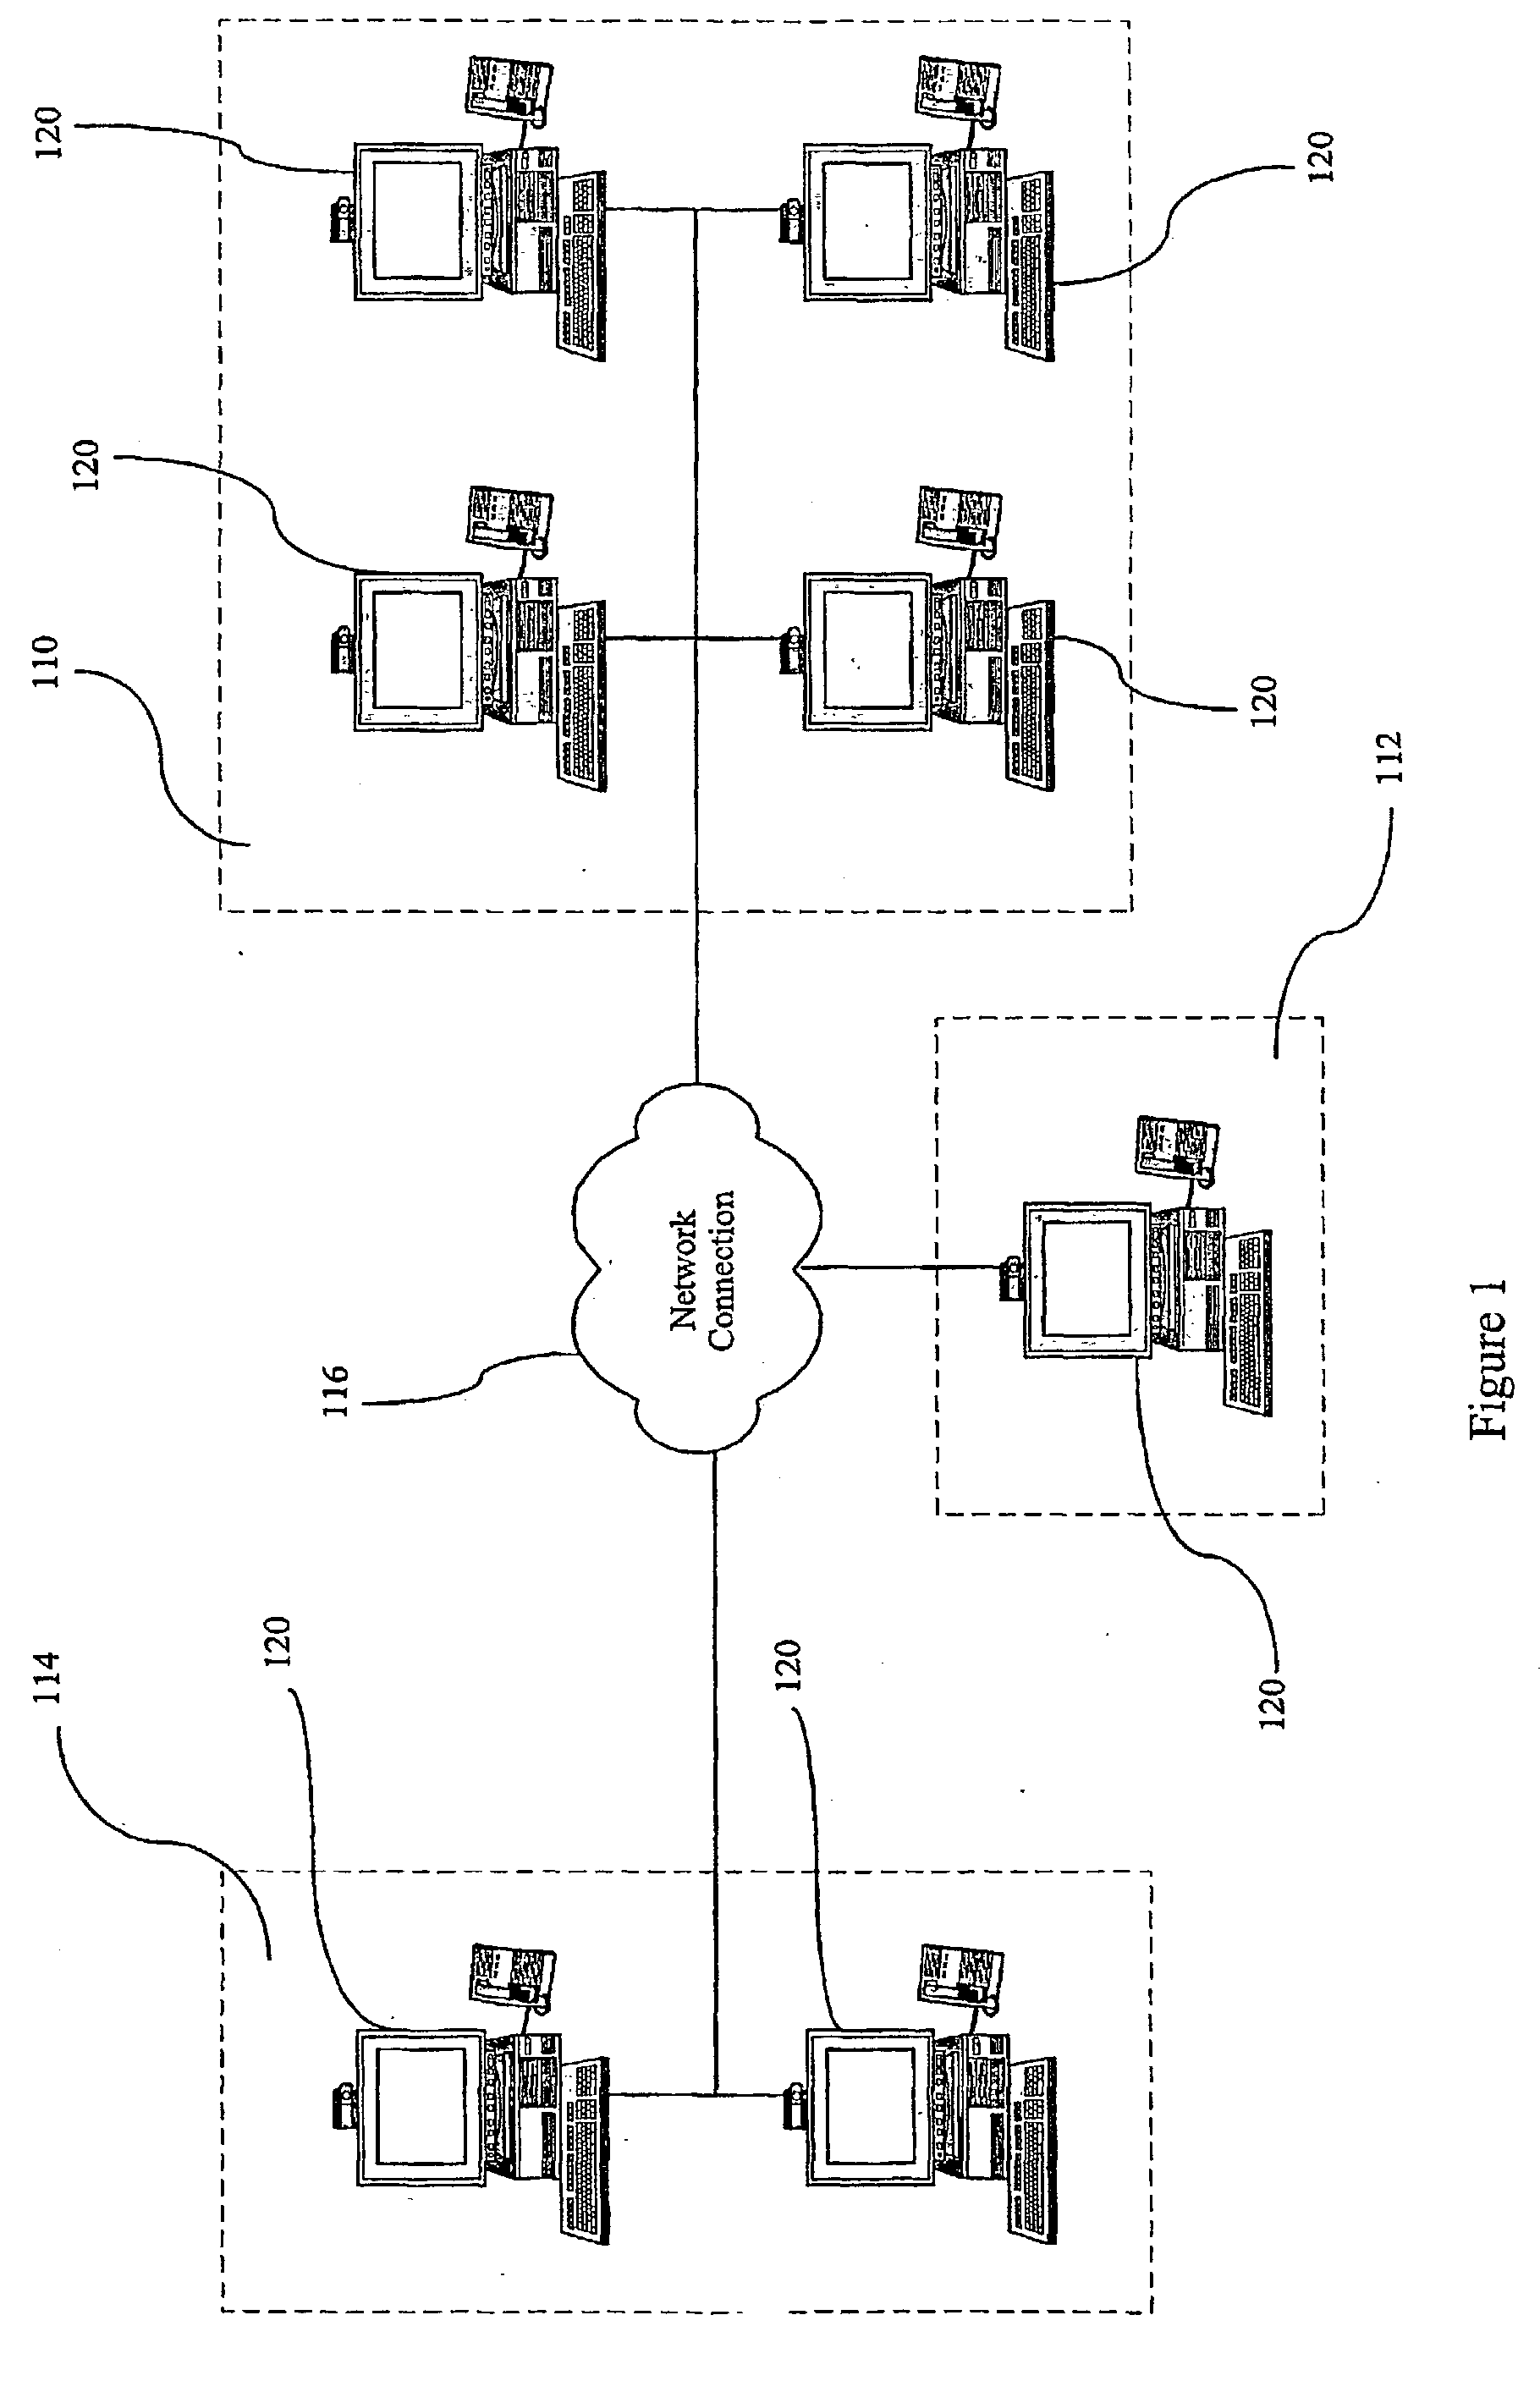 Cooperative planning system and method